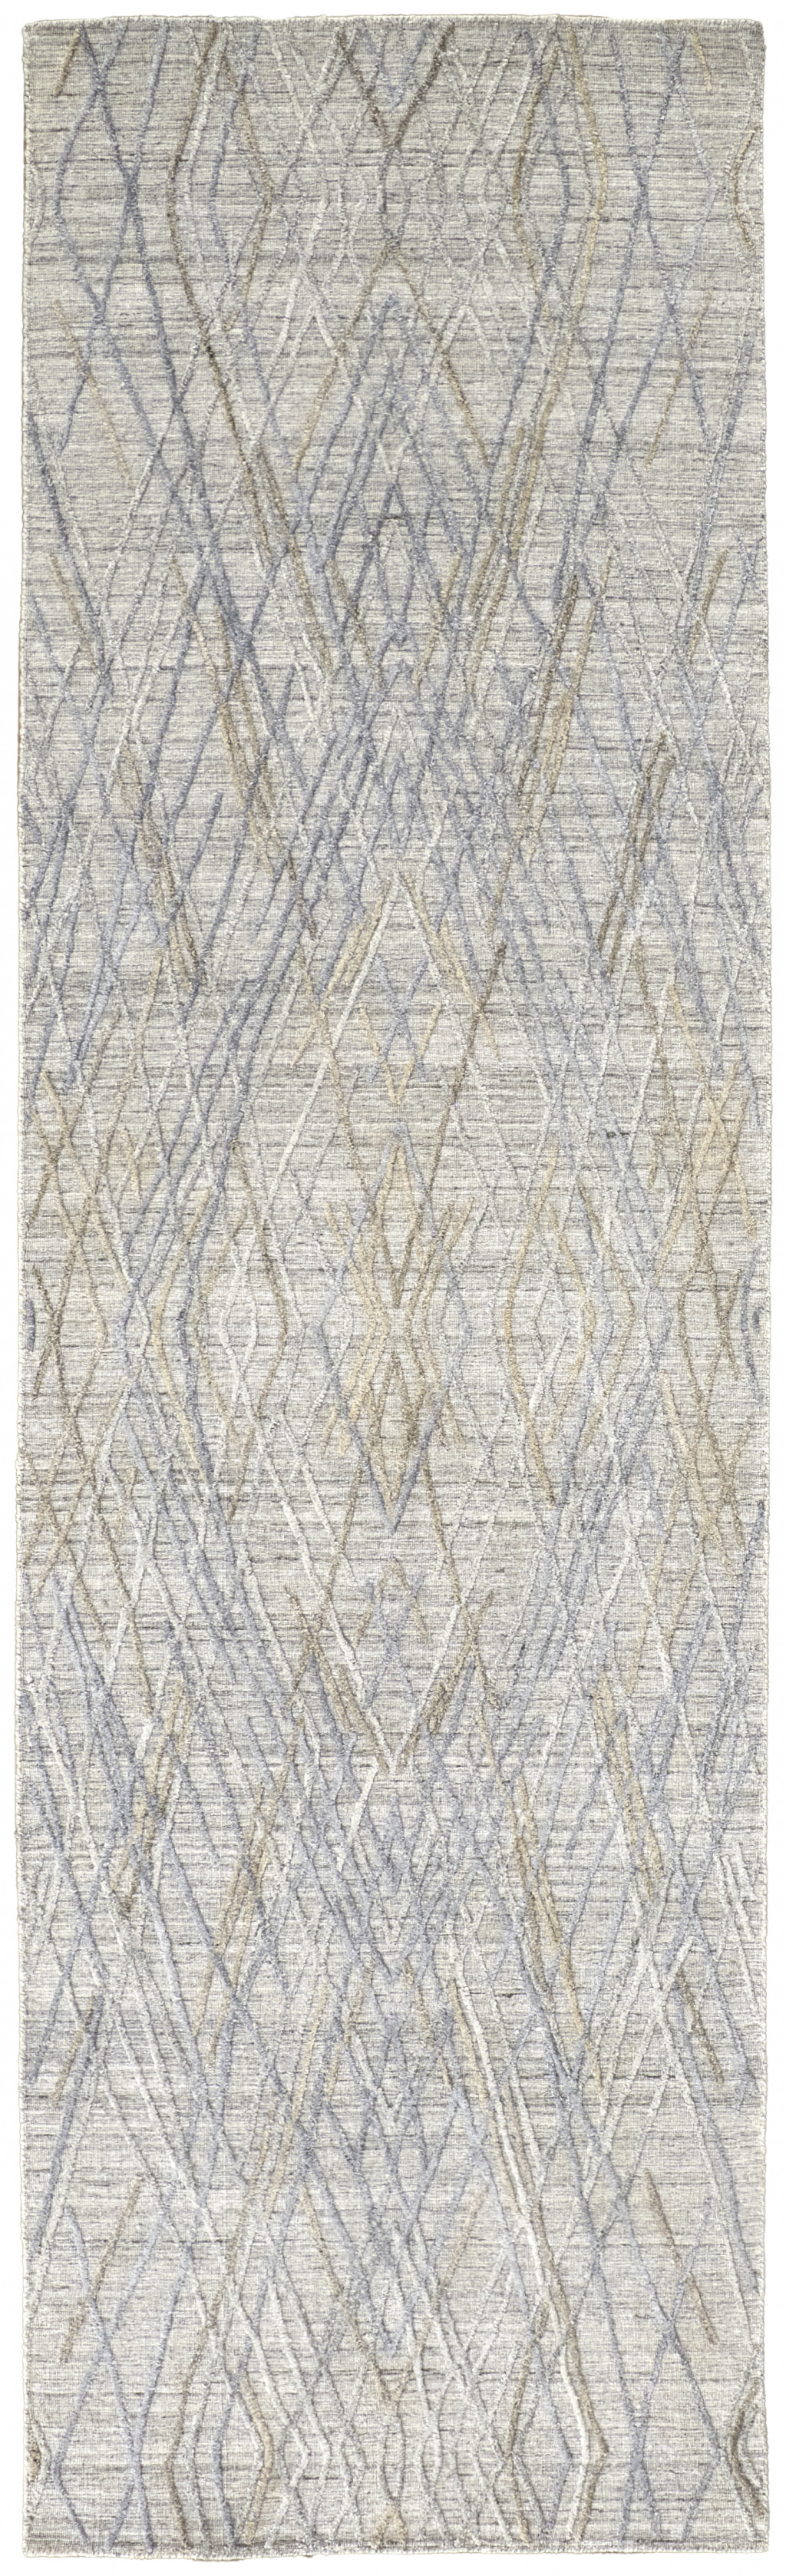 10' Gray And Blue Abstract Hand Woven Runner Rug-513549-1